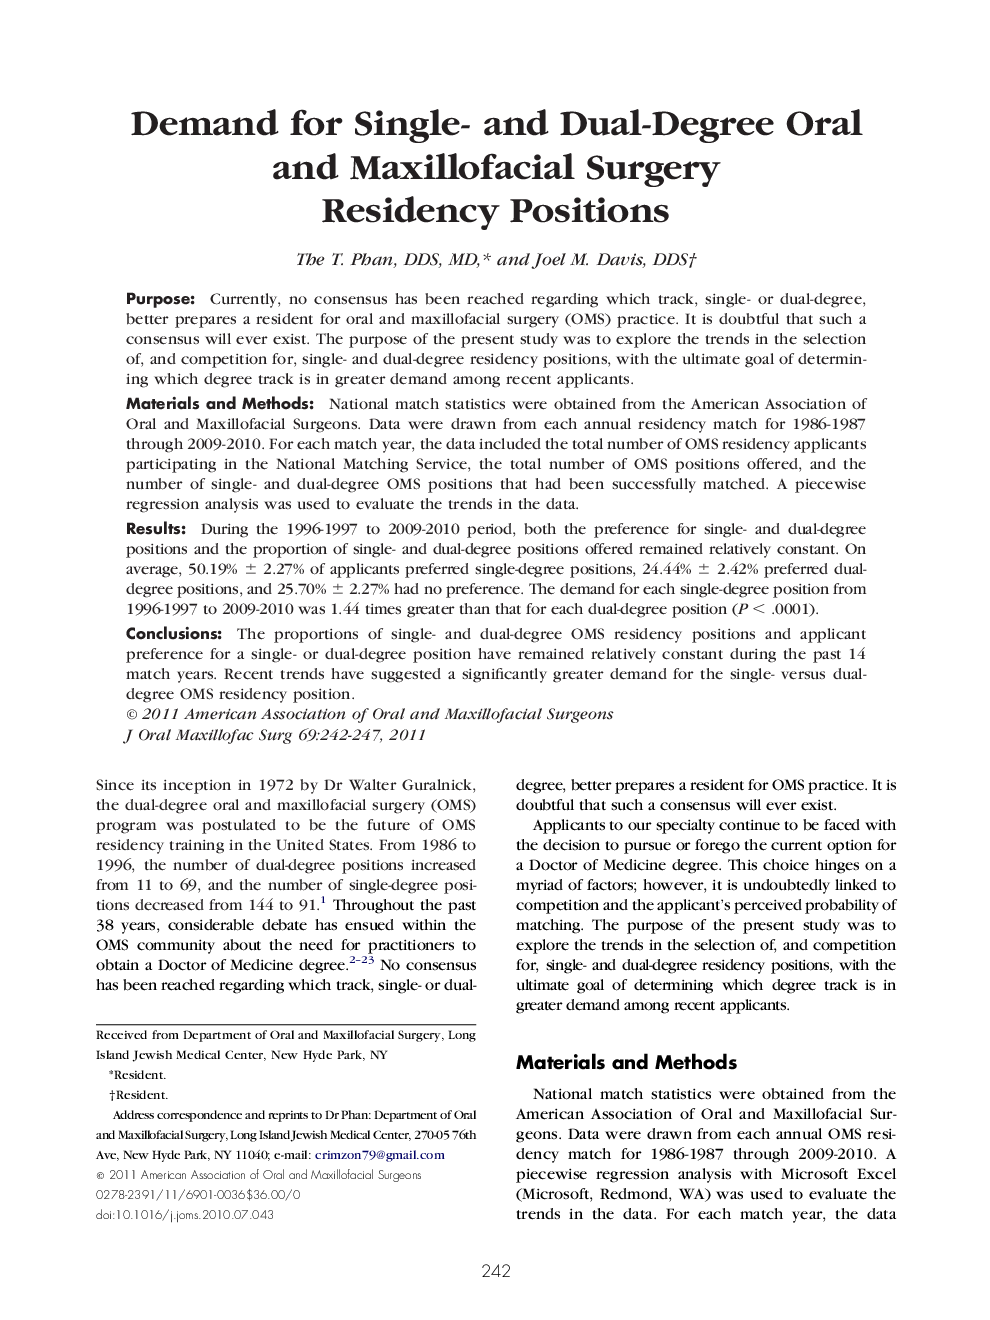 Demand for Single- and Dual-Degree Oral and Maxillofacial Surgery Residency Positions